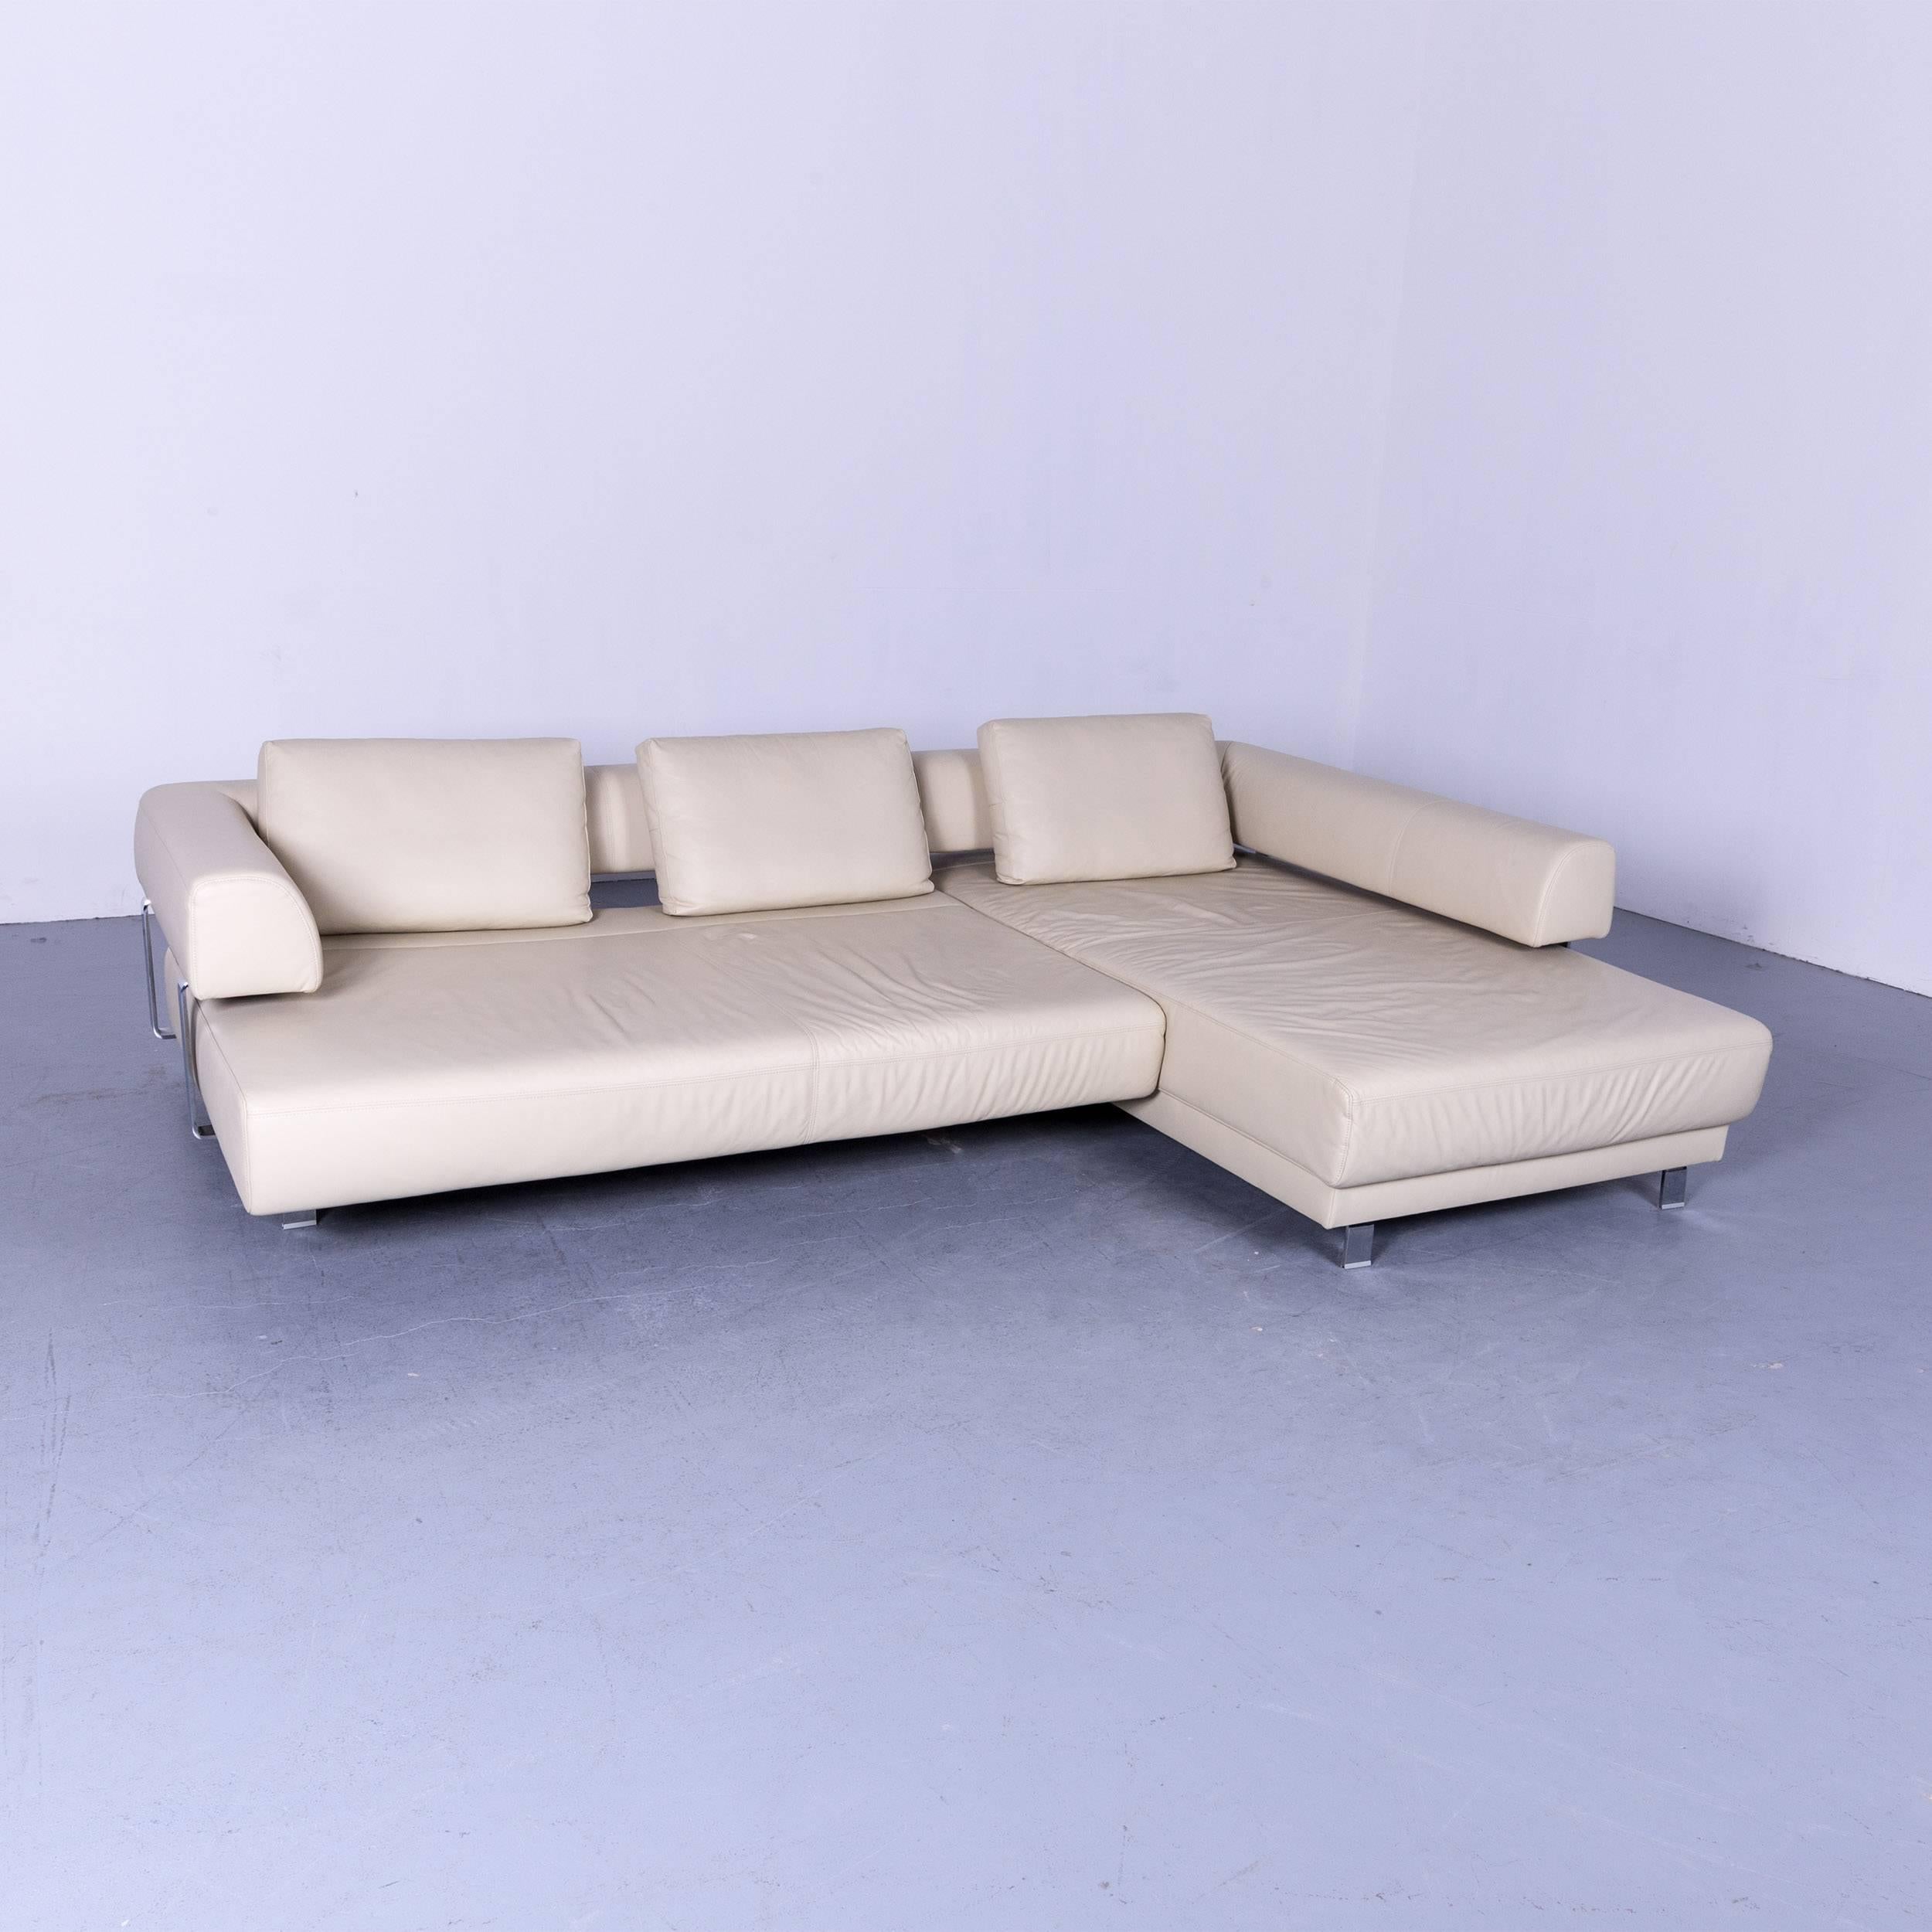 Ewald Schillig brand face designer corner sofa beige leather couch, in a minimalistic and modern design, made for pure comfort.